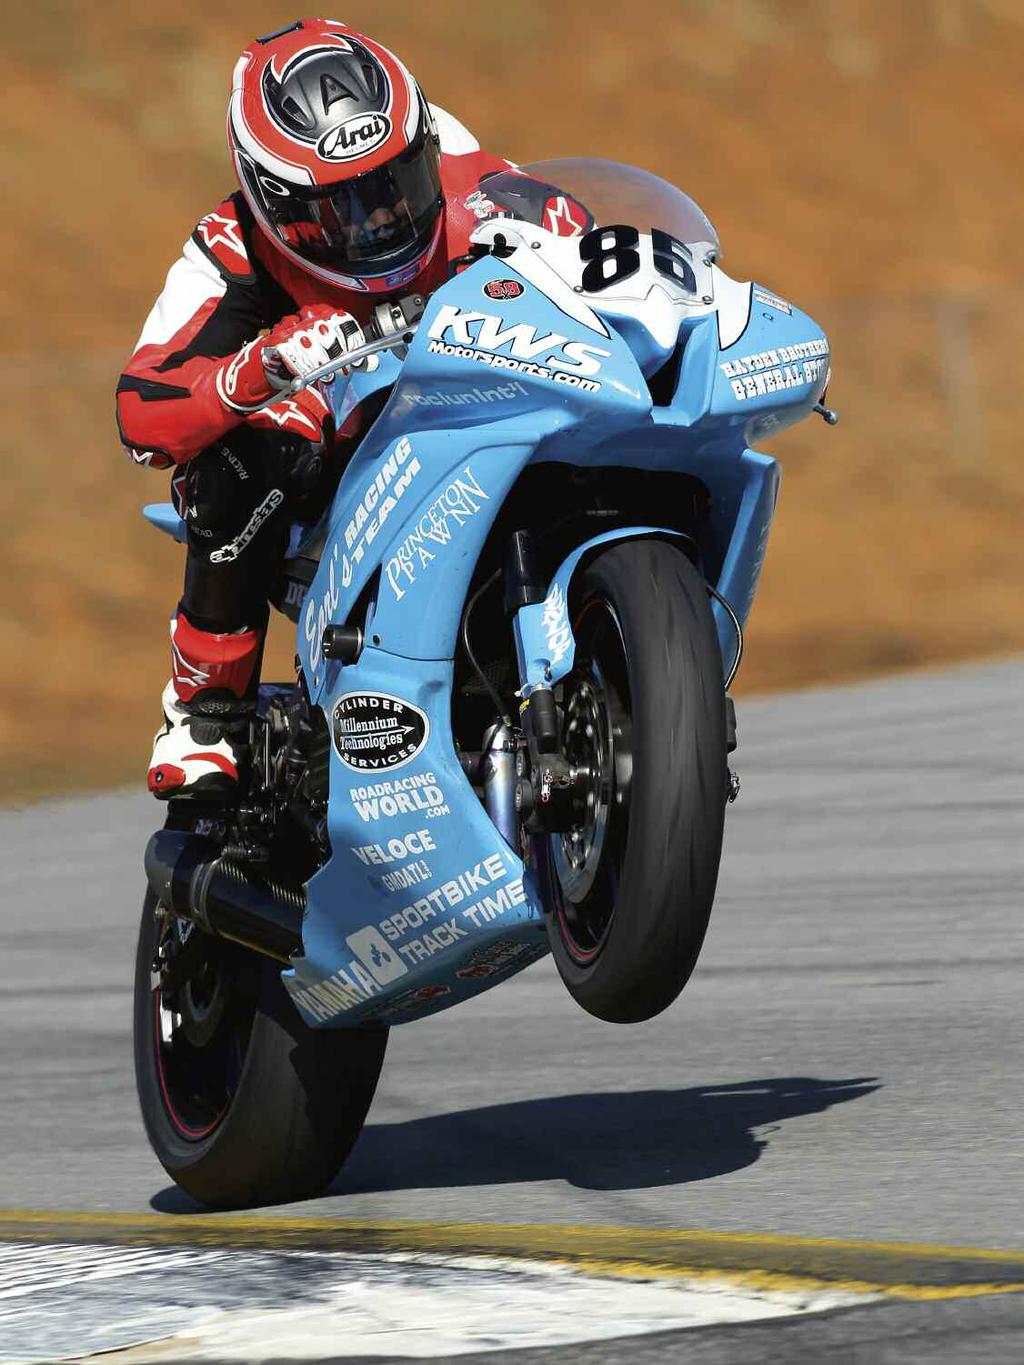 AMA ROADRACE HORIZON AWARD WINNER: JAKE LEWIS 22 Established in 1997, the AMA Horizon Awards are presented annually by American Motorcyclist Association to the most outstanding riders in the AMA